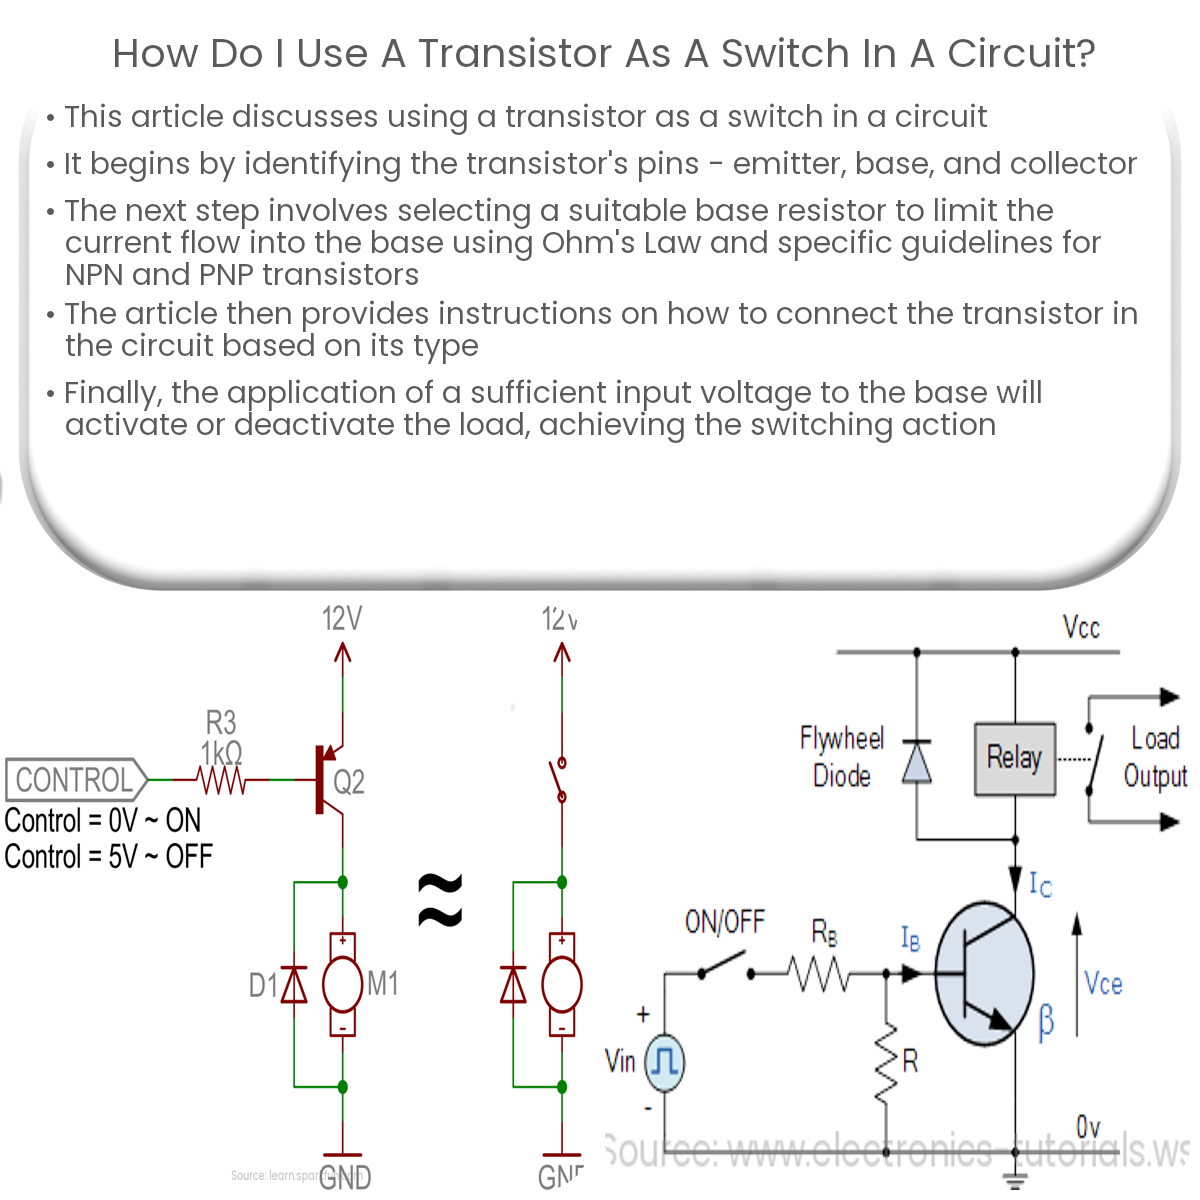 How do I use a transistor as a switch in a circuit?